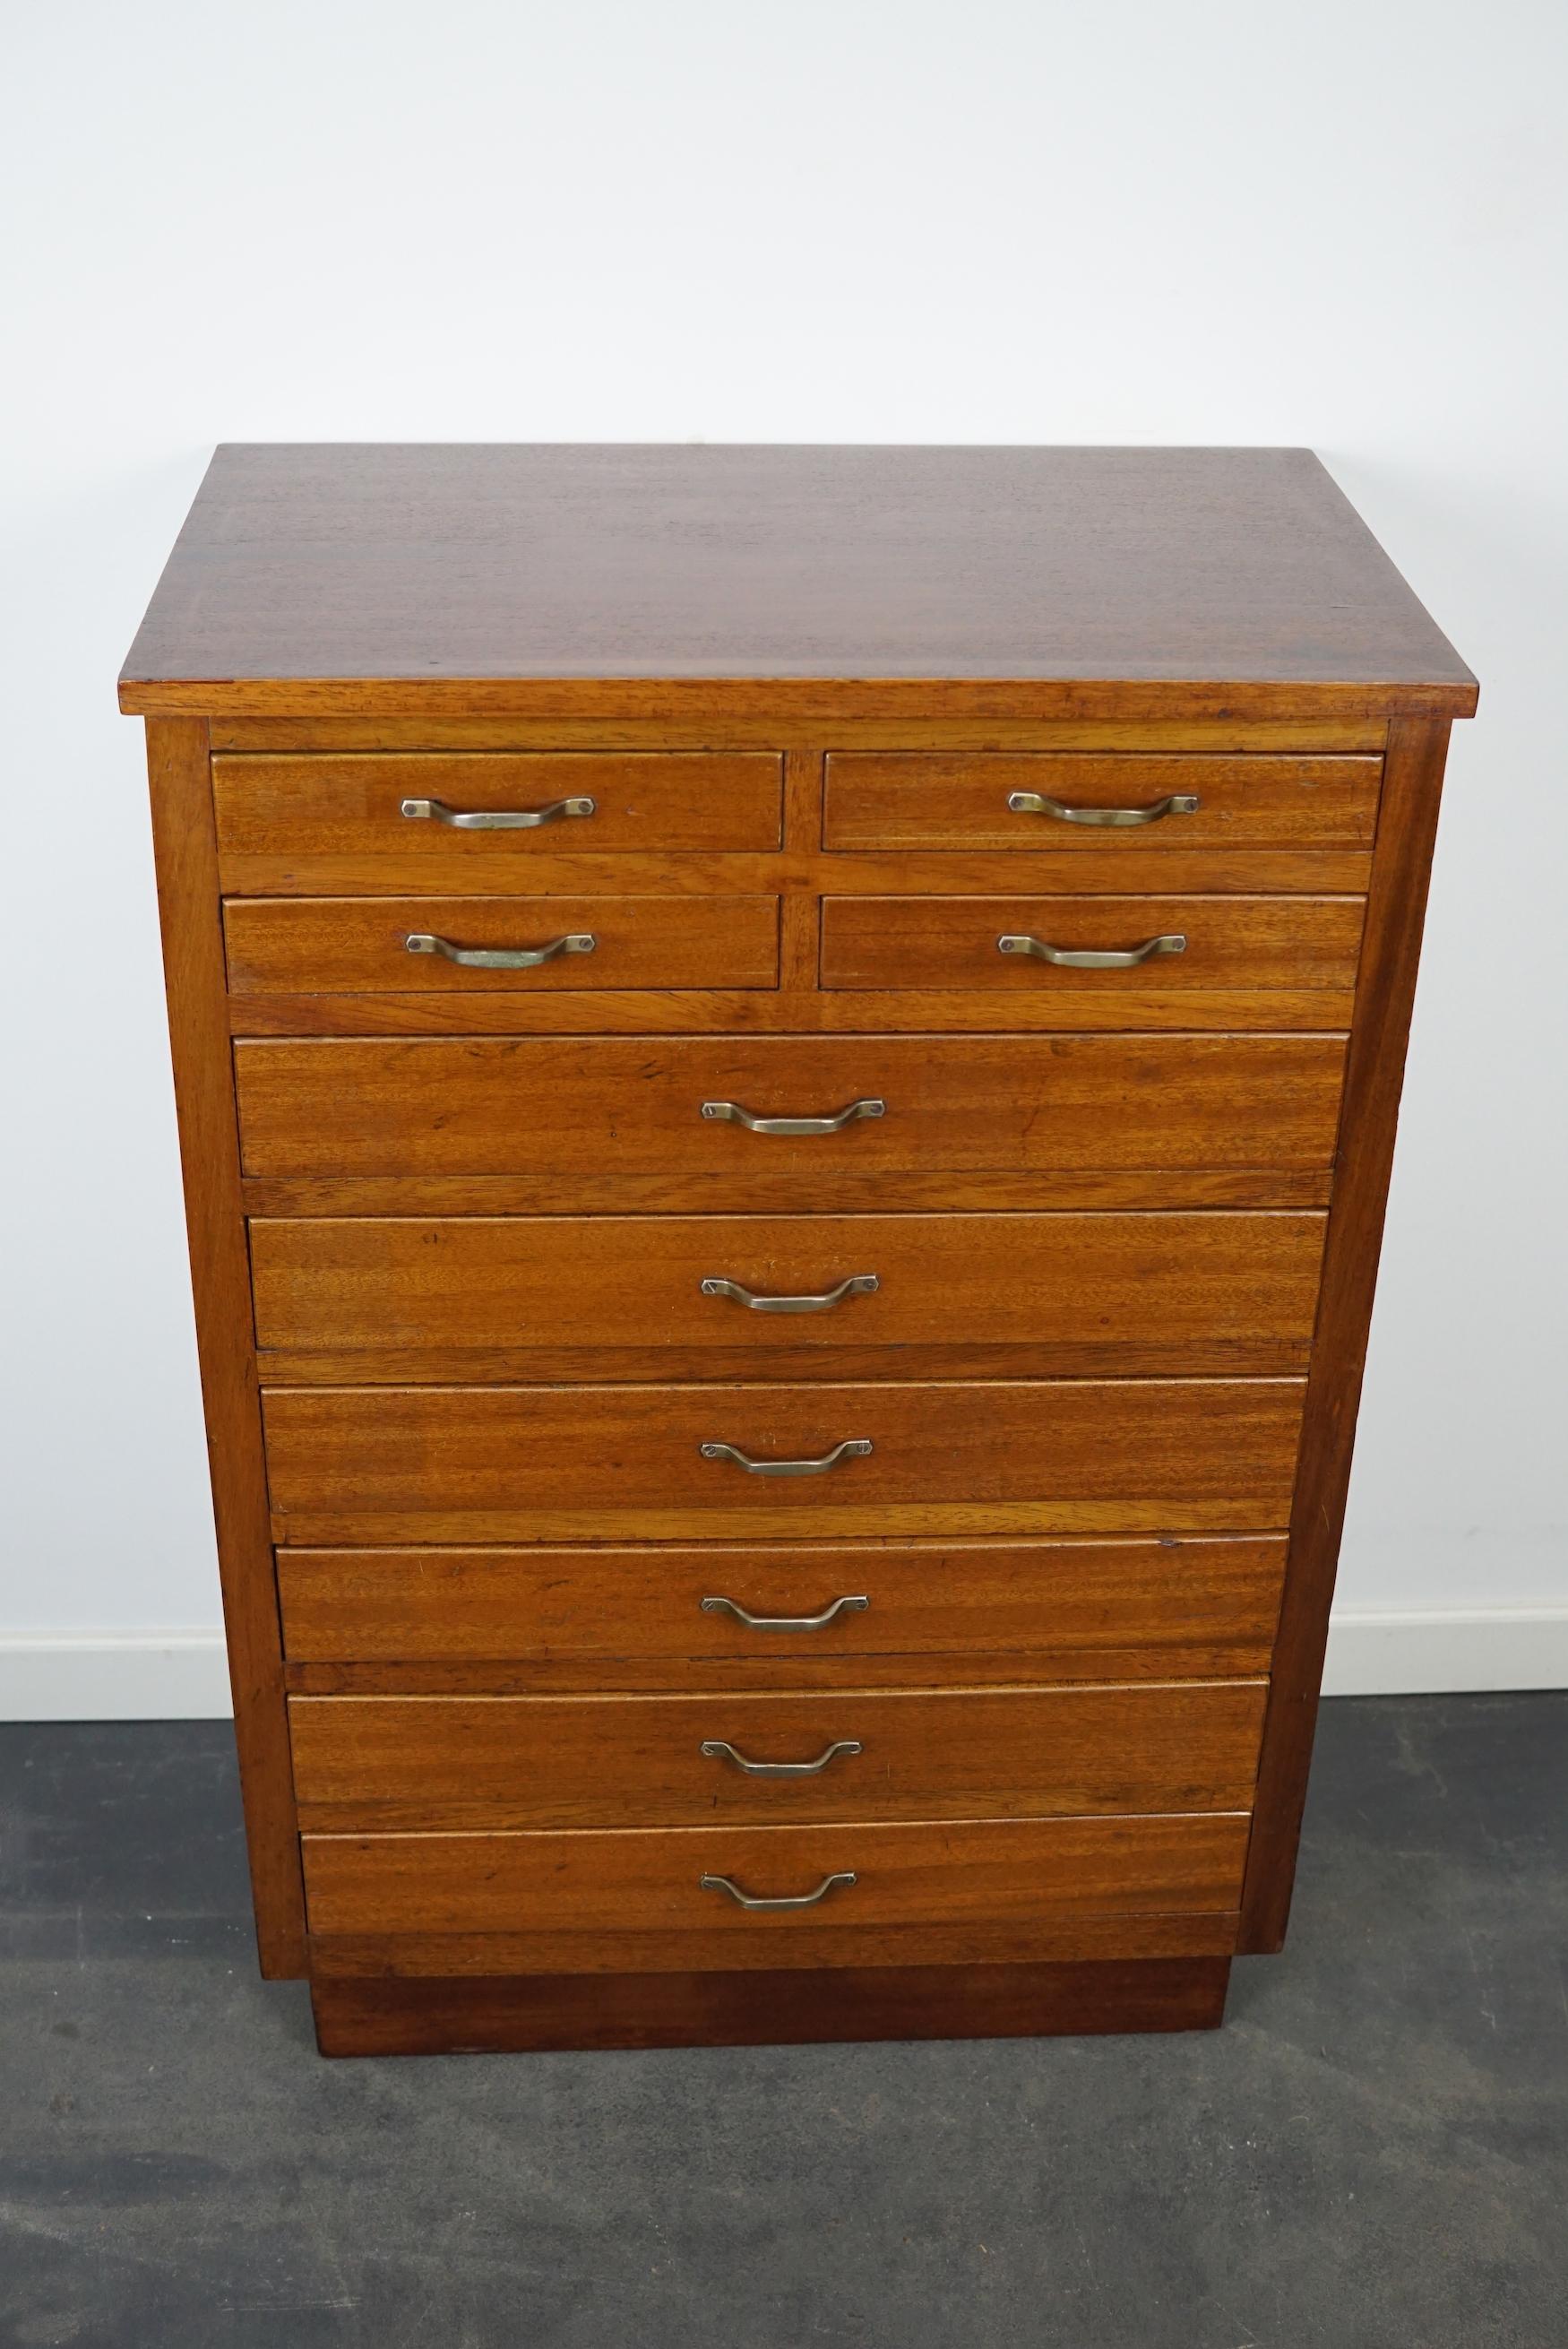 This dentist cabinet was designed and made circa 1930 in Amsterdam, The Netherlands. It features many small mahogany fronted drawers in two different sizes: DWH 30 x 24 x 3.5 and 30 x 52 x 6 cm. It was used to store dentist supplies and tools.
 